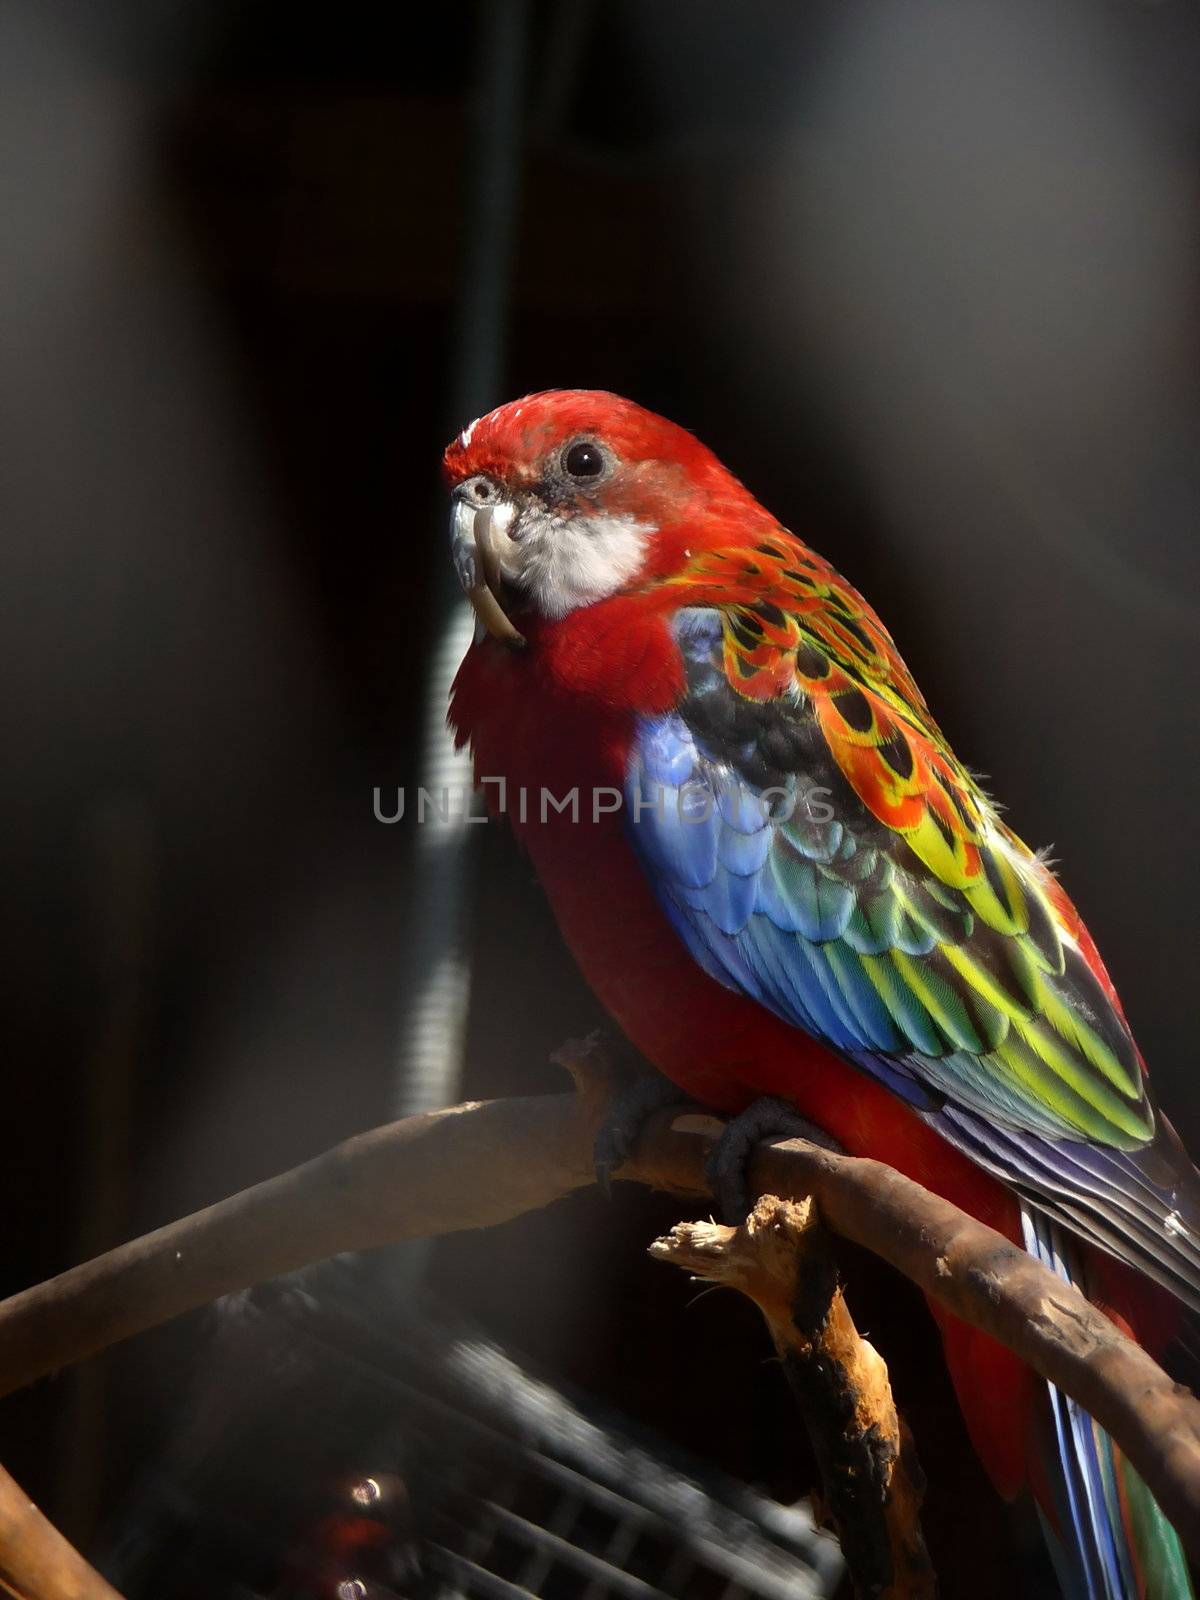 Colorful red parrot with curved beak on a black background 